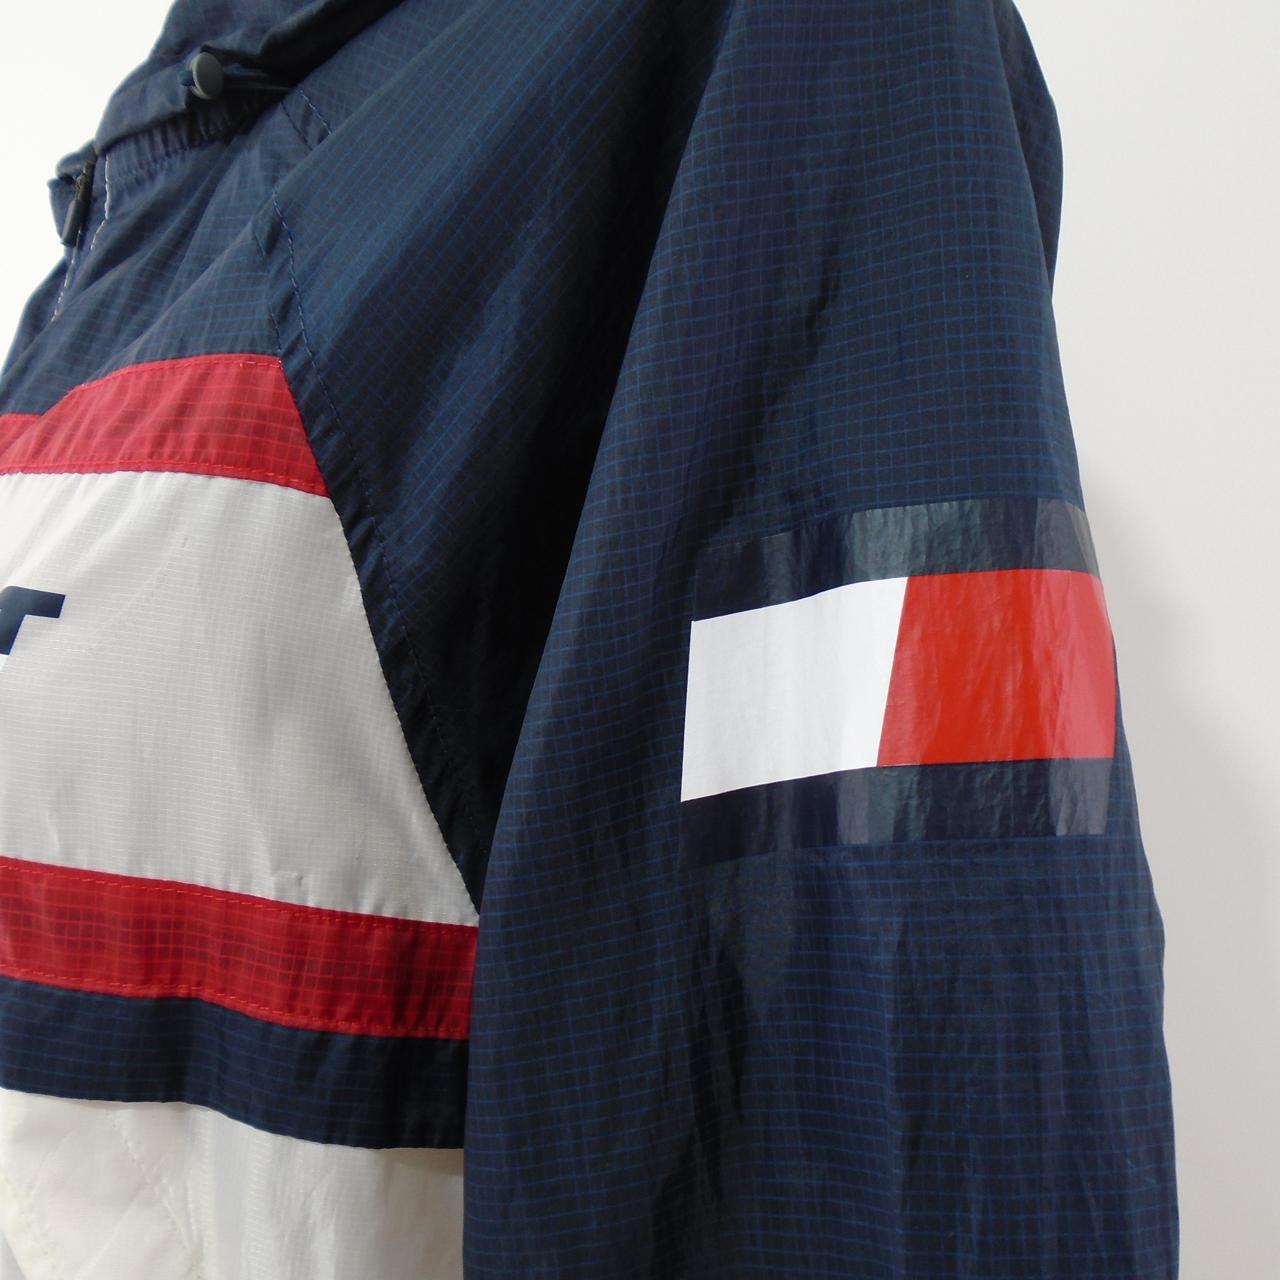 Women's Jacket Tommy Hilfiger. Multicolor. XS. Used. Good